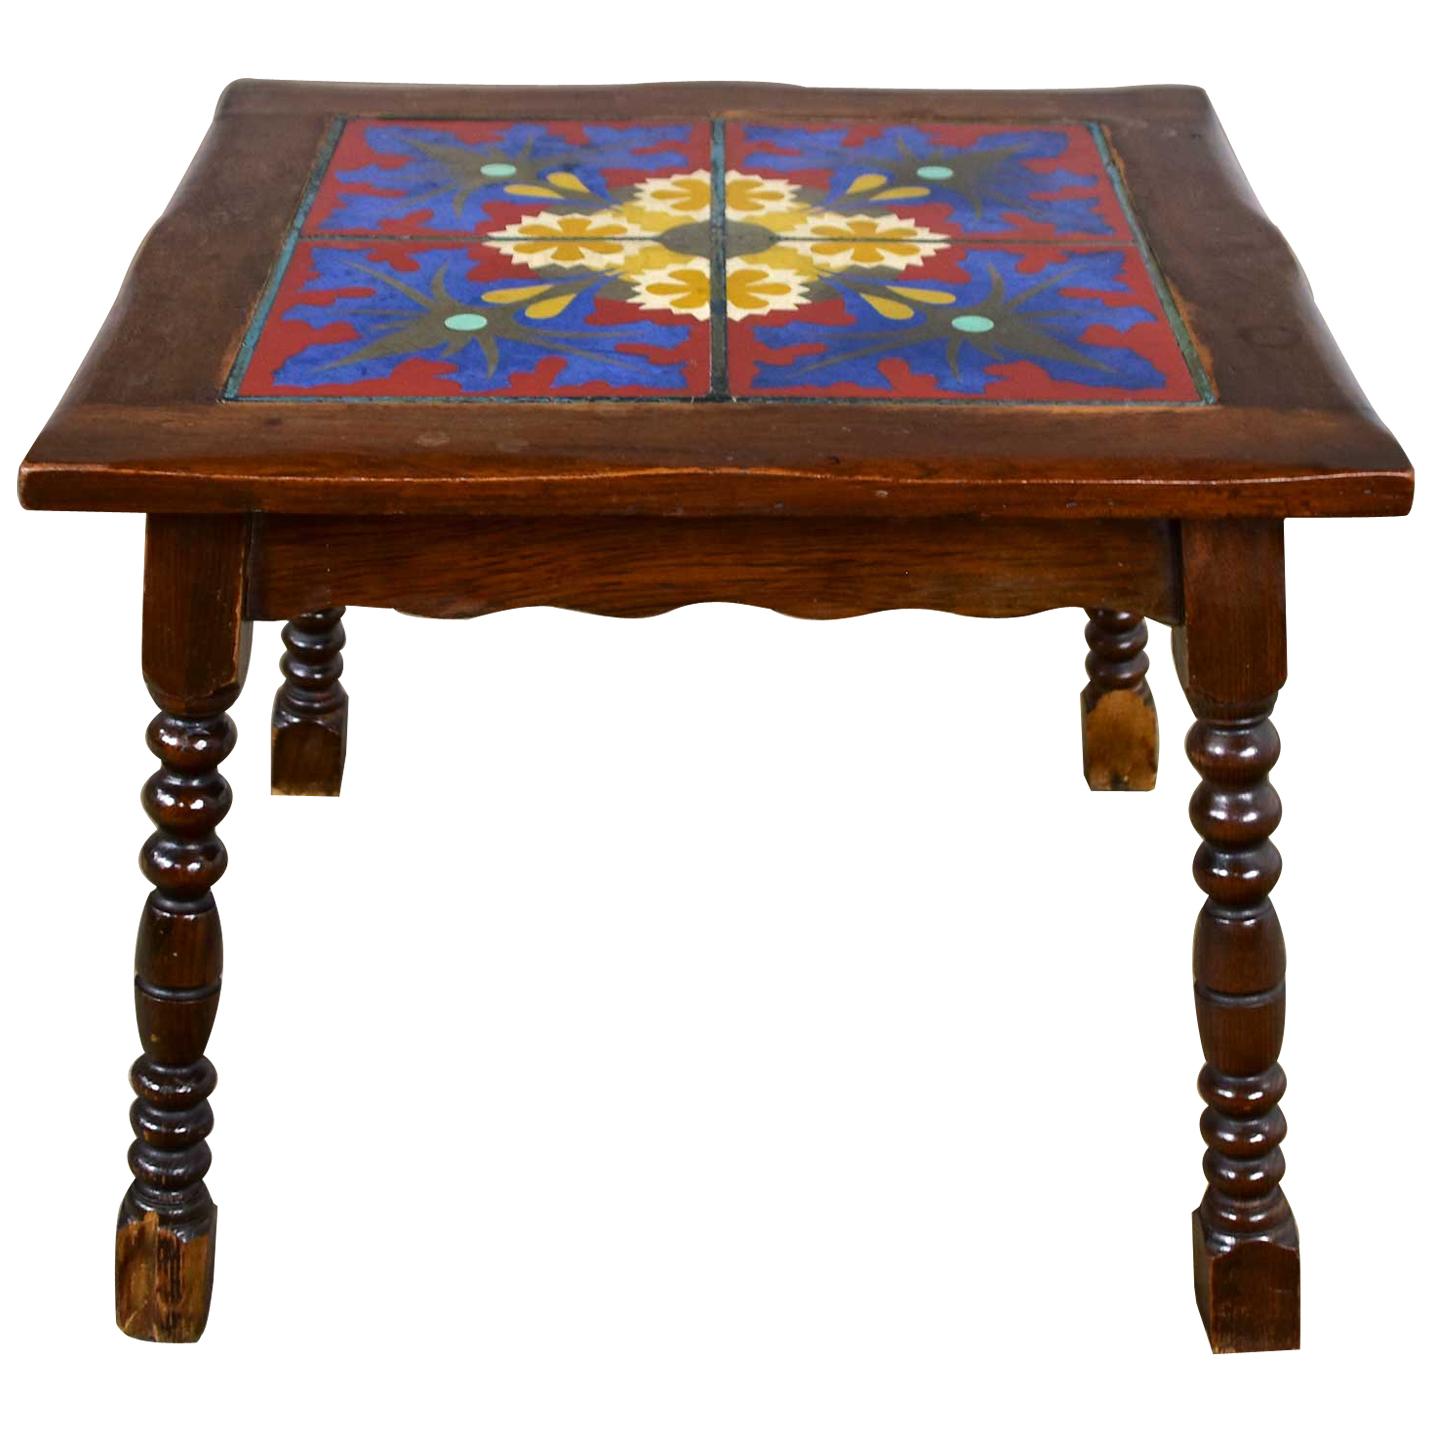 Catalina California or Mission Arts & Crafts Style Spanish Tile Top Side Table